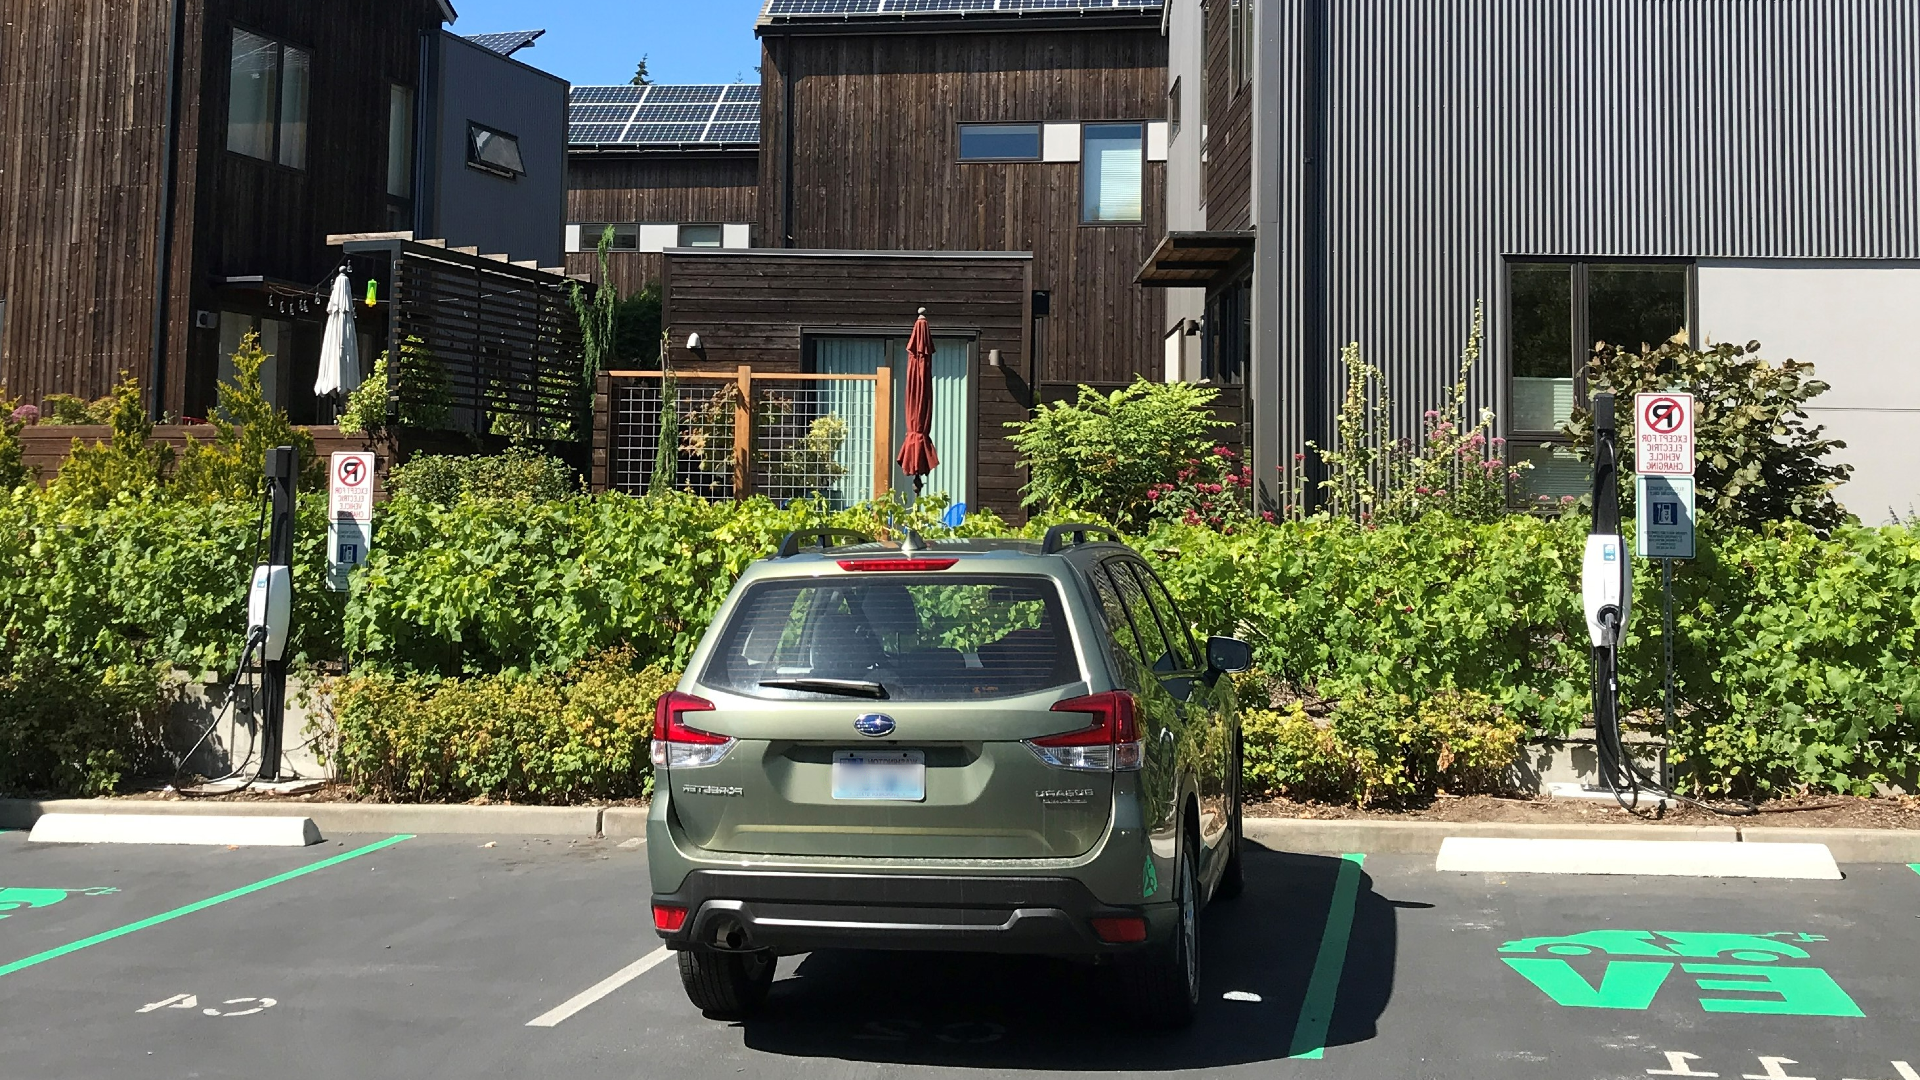 Grow Community on Bainbridge Island was one of 35 properties in our service area to receive electric vehicle charging for its tenants through our Multifamily Charging pilot.